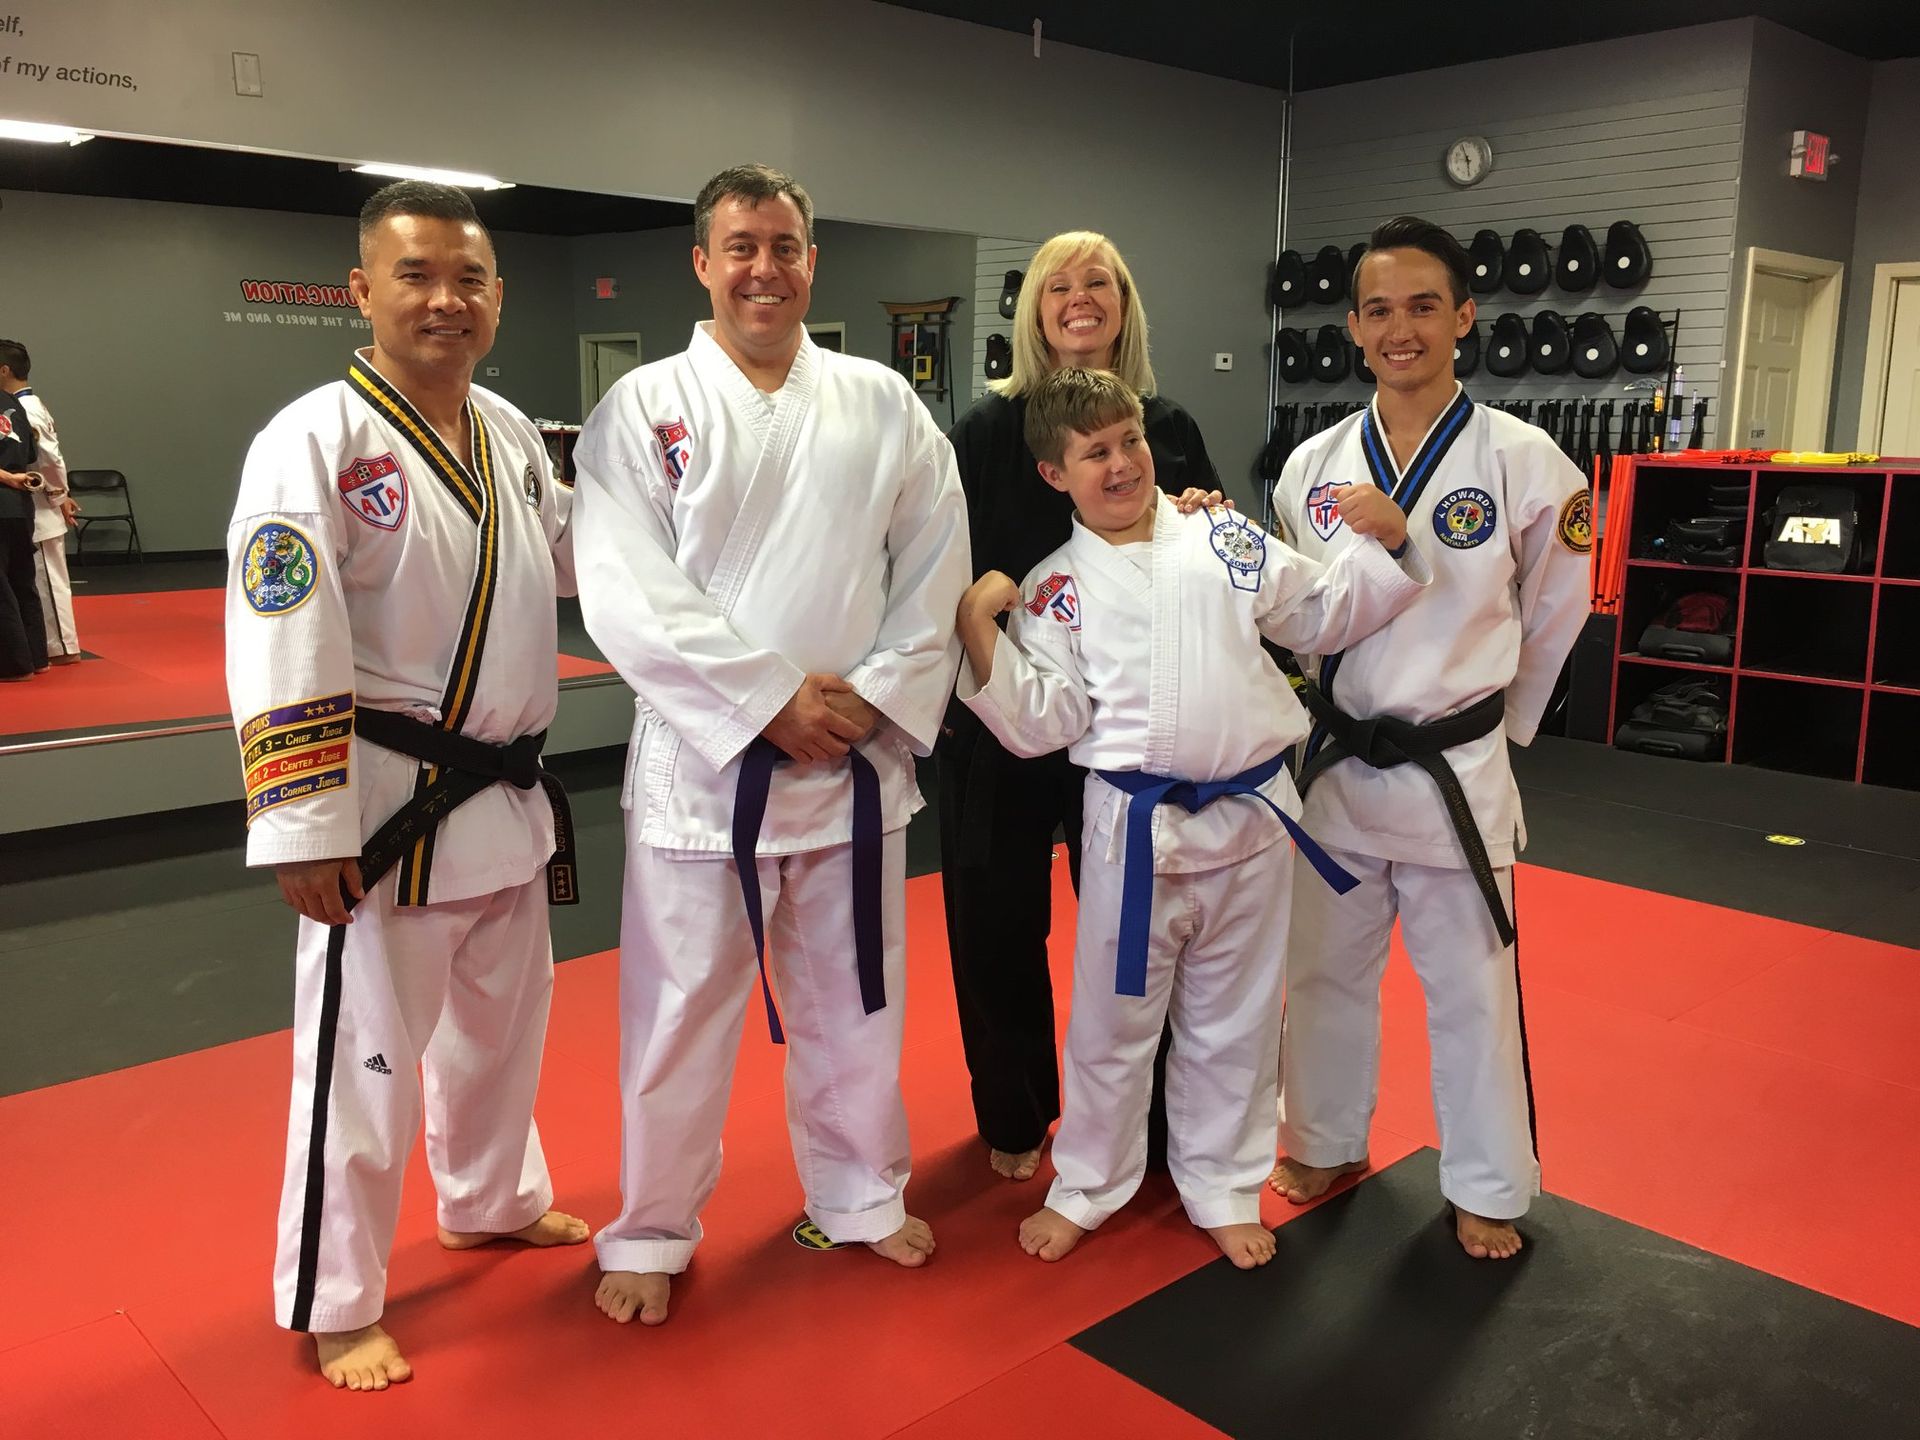 A group of people in karate uniforms are posing for a picture in a gym.